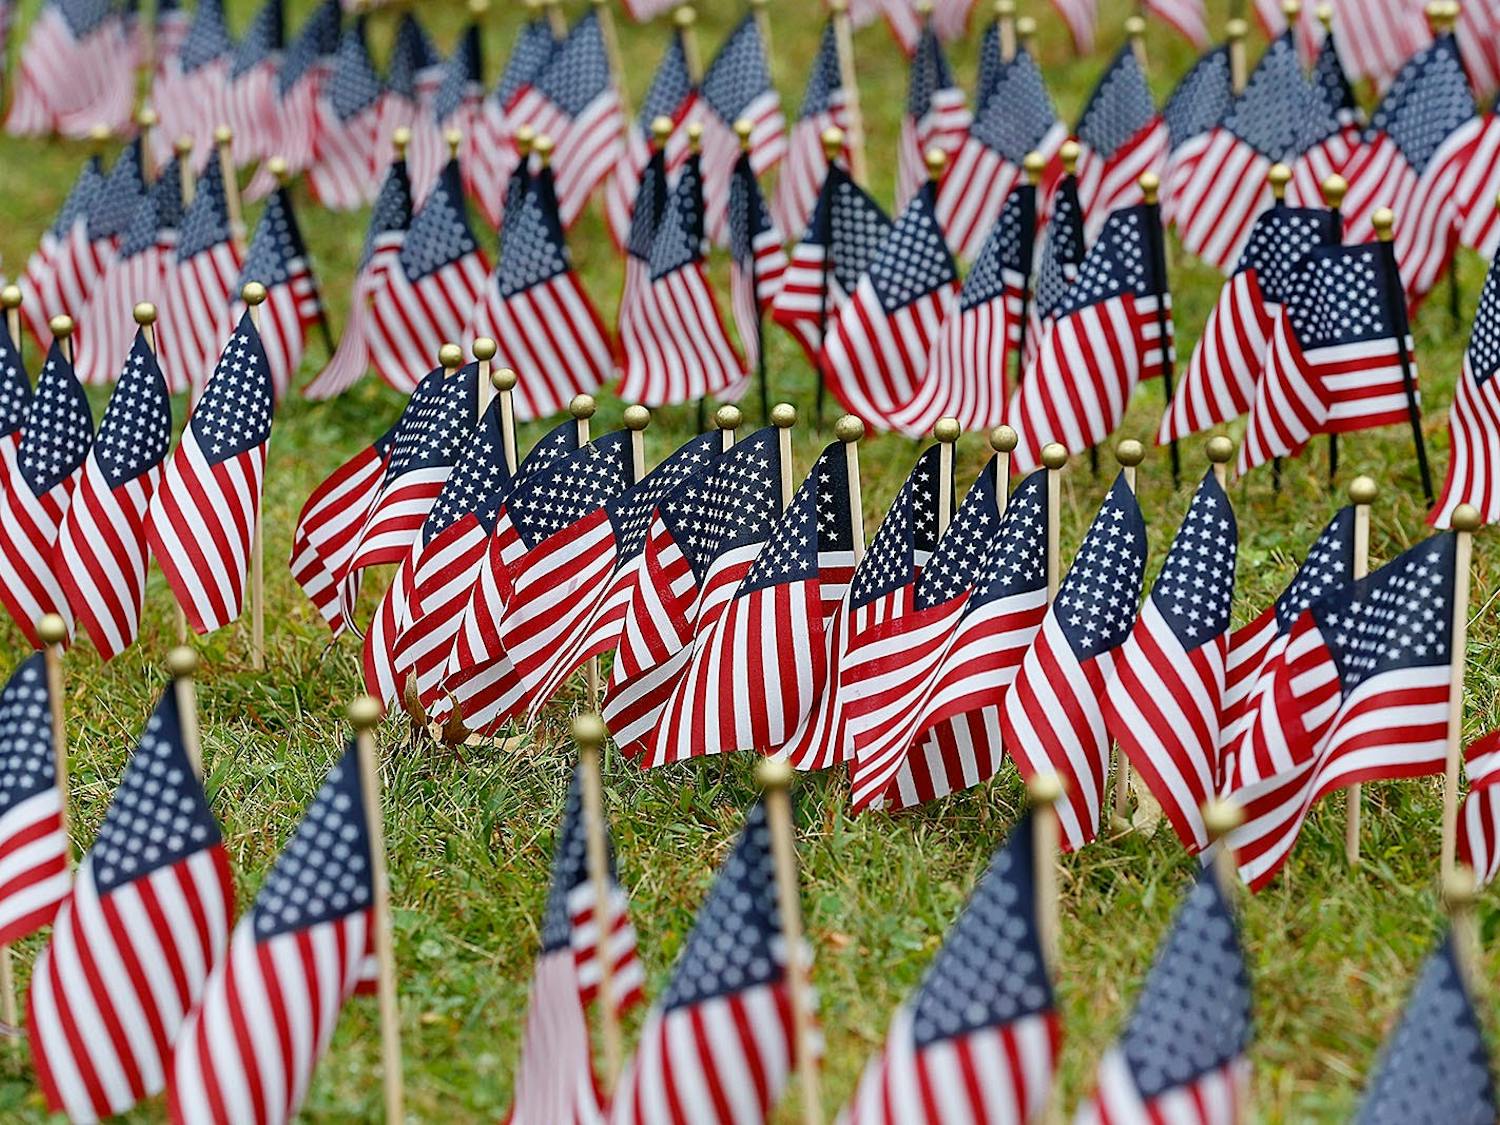 Flags placed on the Braintree Town Common in honor of those killed on 9/11. Of the nearly 3,000 flags, 2,574 American flags represent the civilians and military personnel who died in the attacks on the World Trade Center, the Pentagon and Shanksville, Pennsylvania. Photo Courtesy of Tribune News Service.